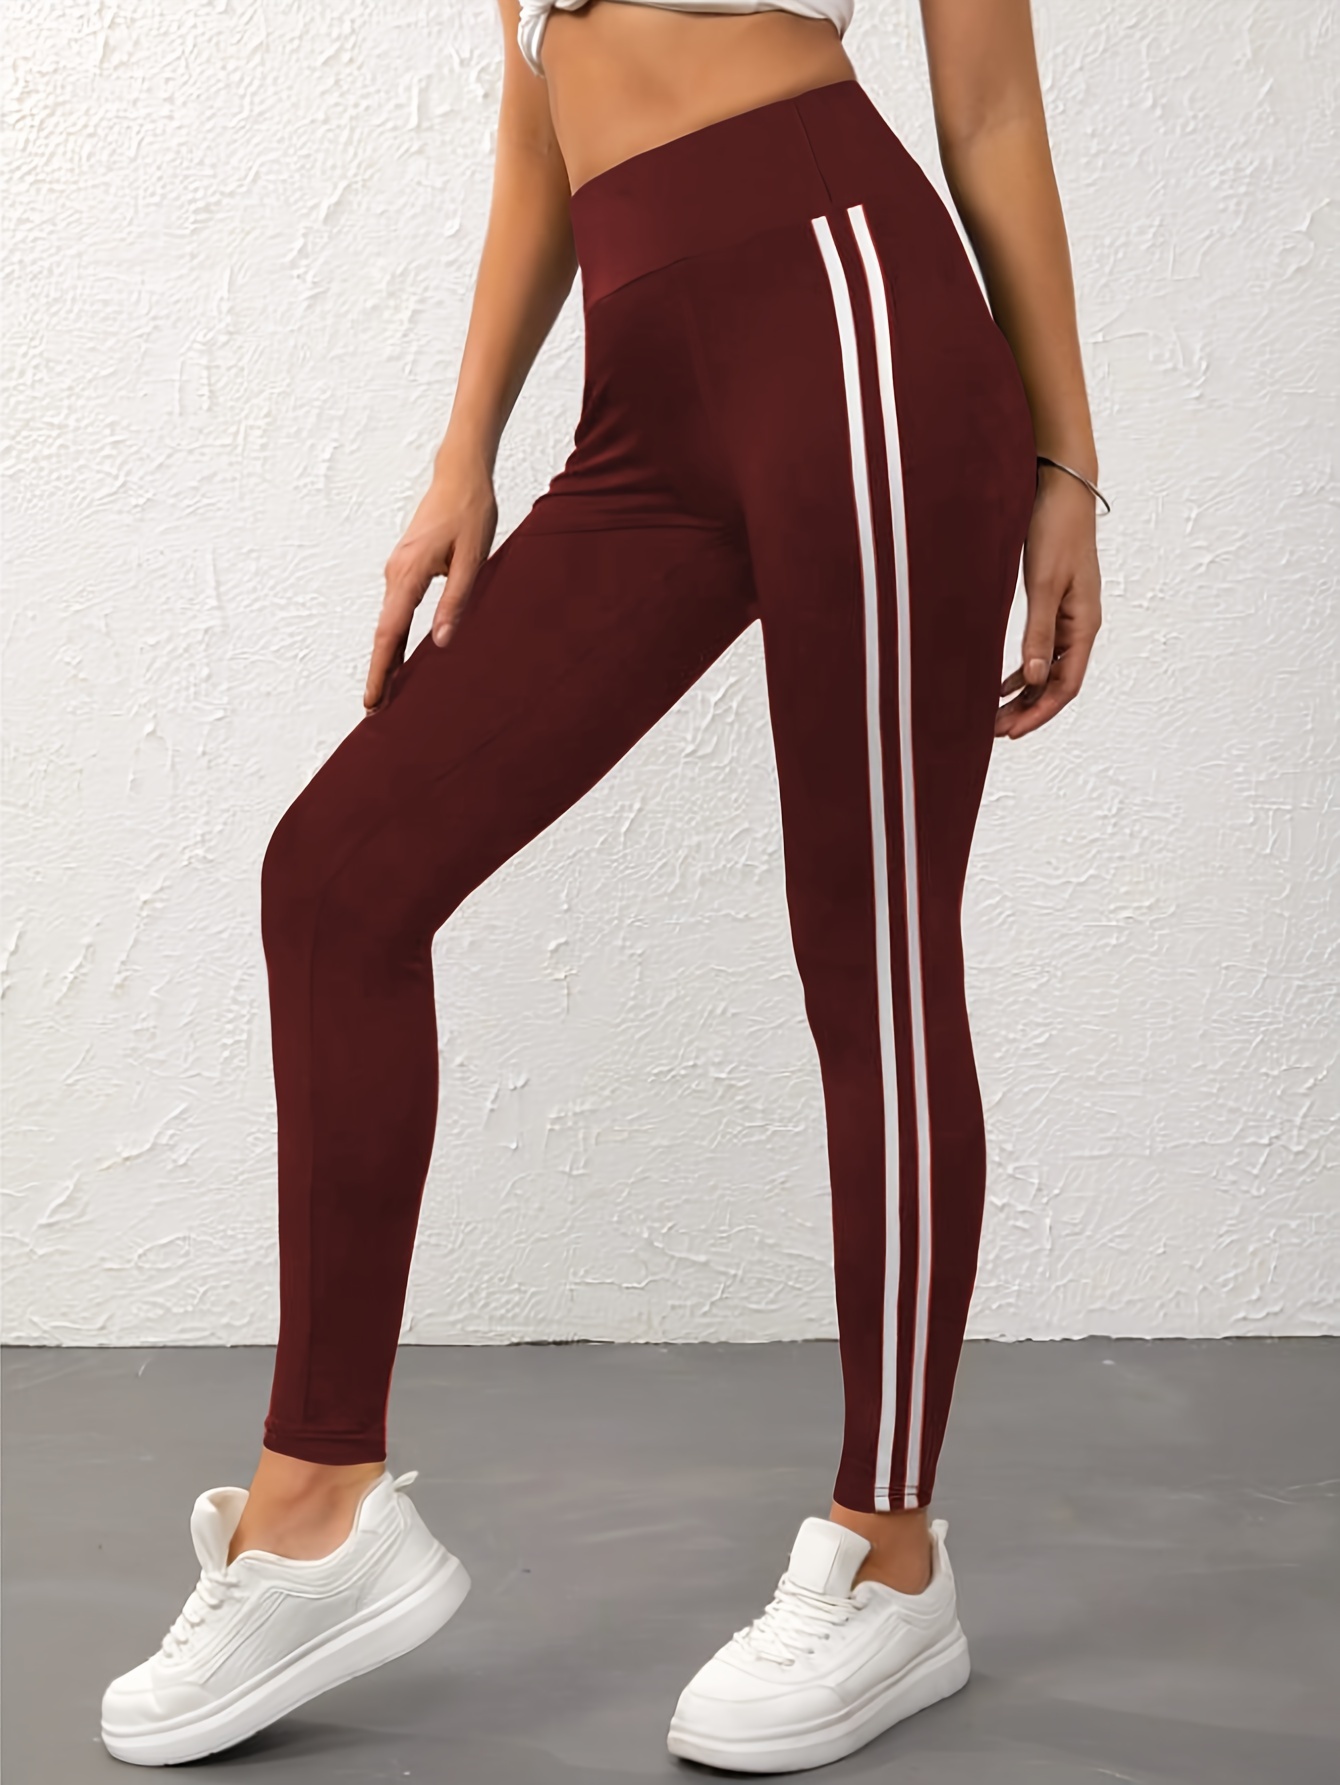 Fashion Ladies Maroon Tights/Jeggings- White Yoga Stripes @ Best Price  Online